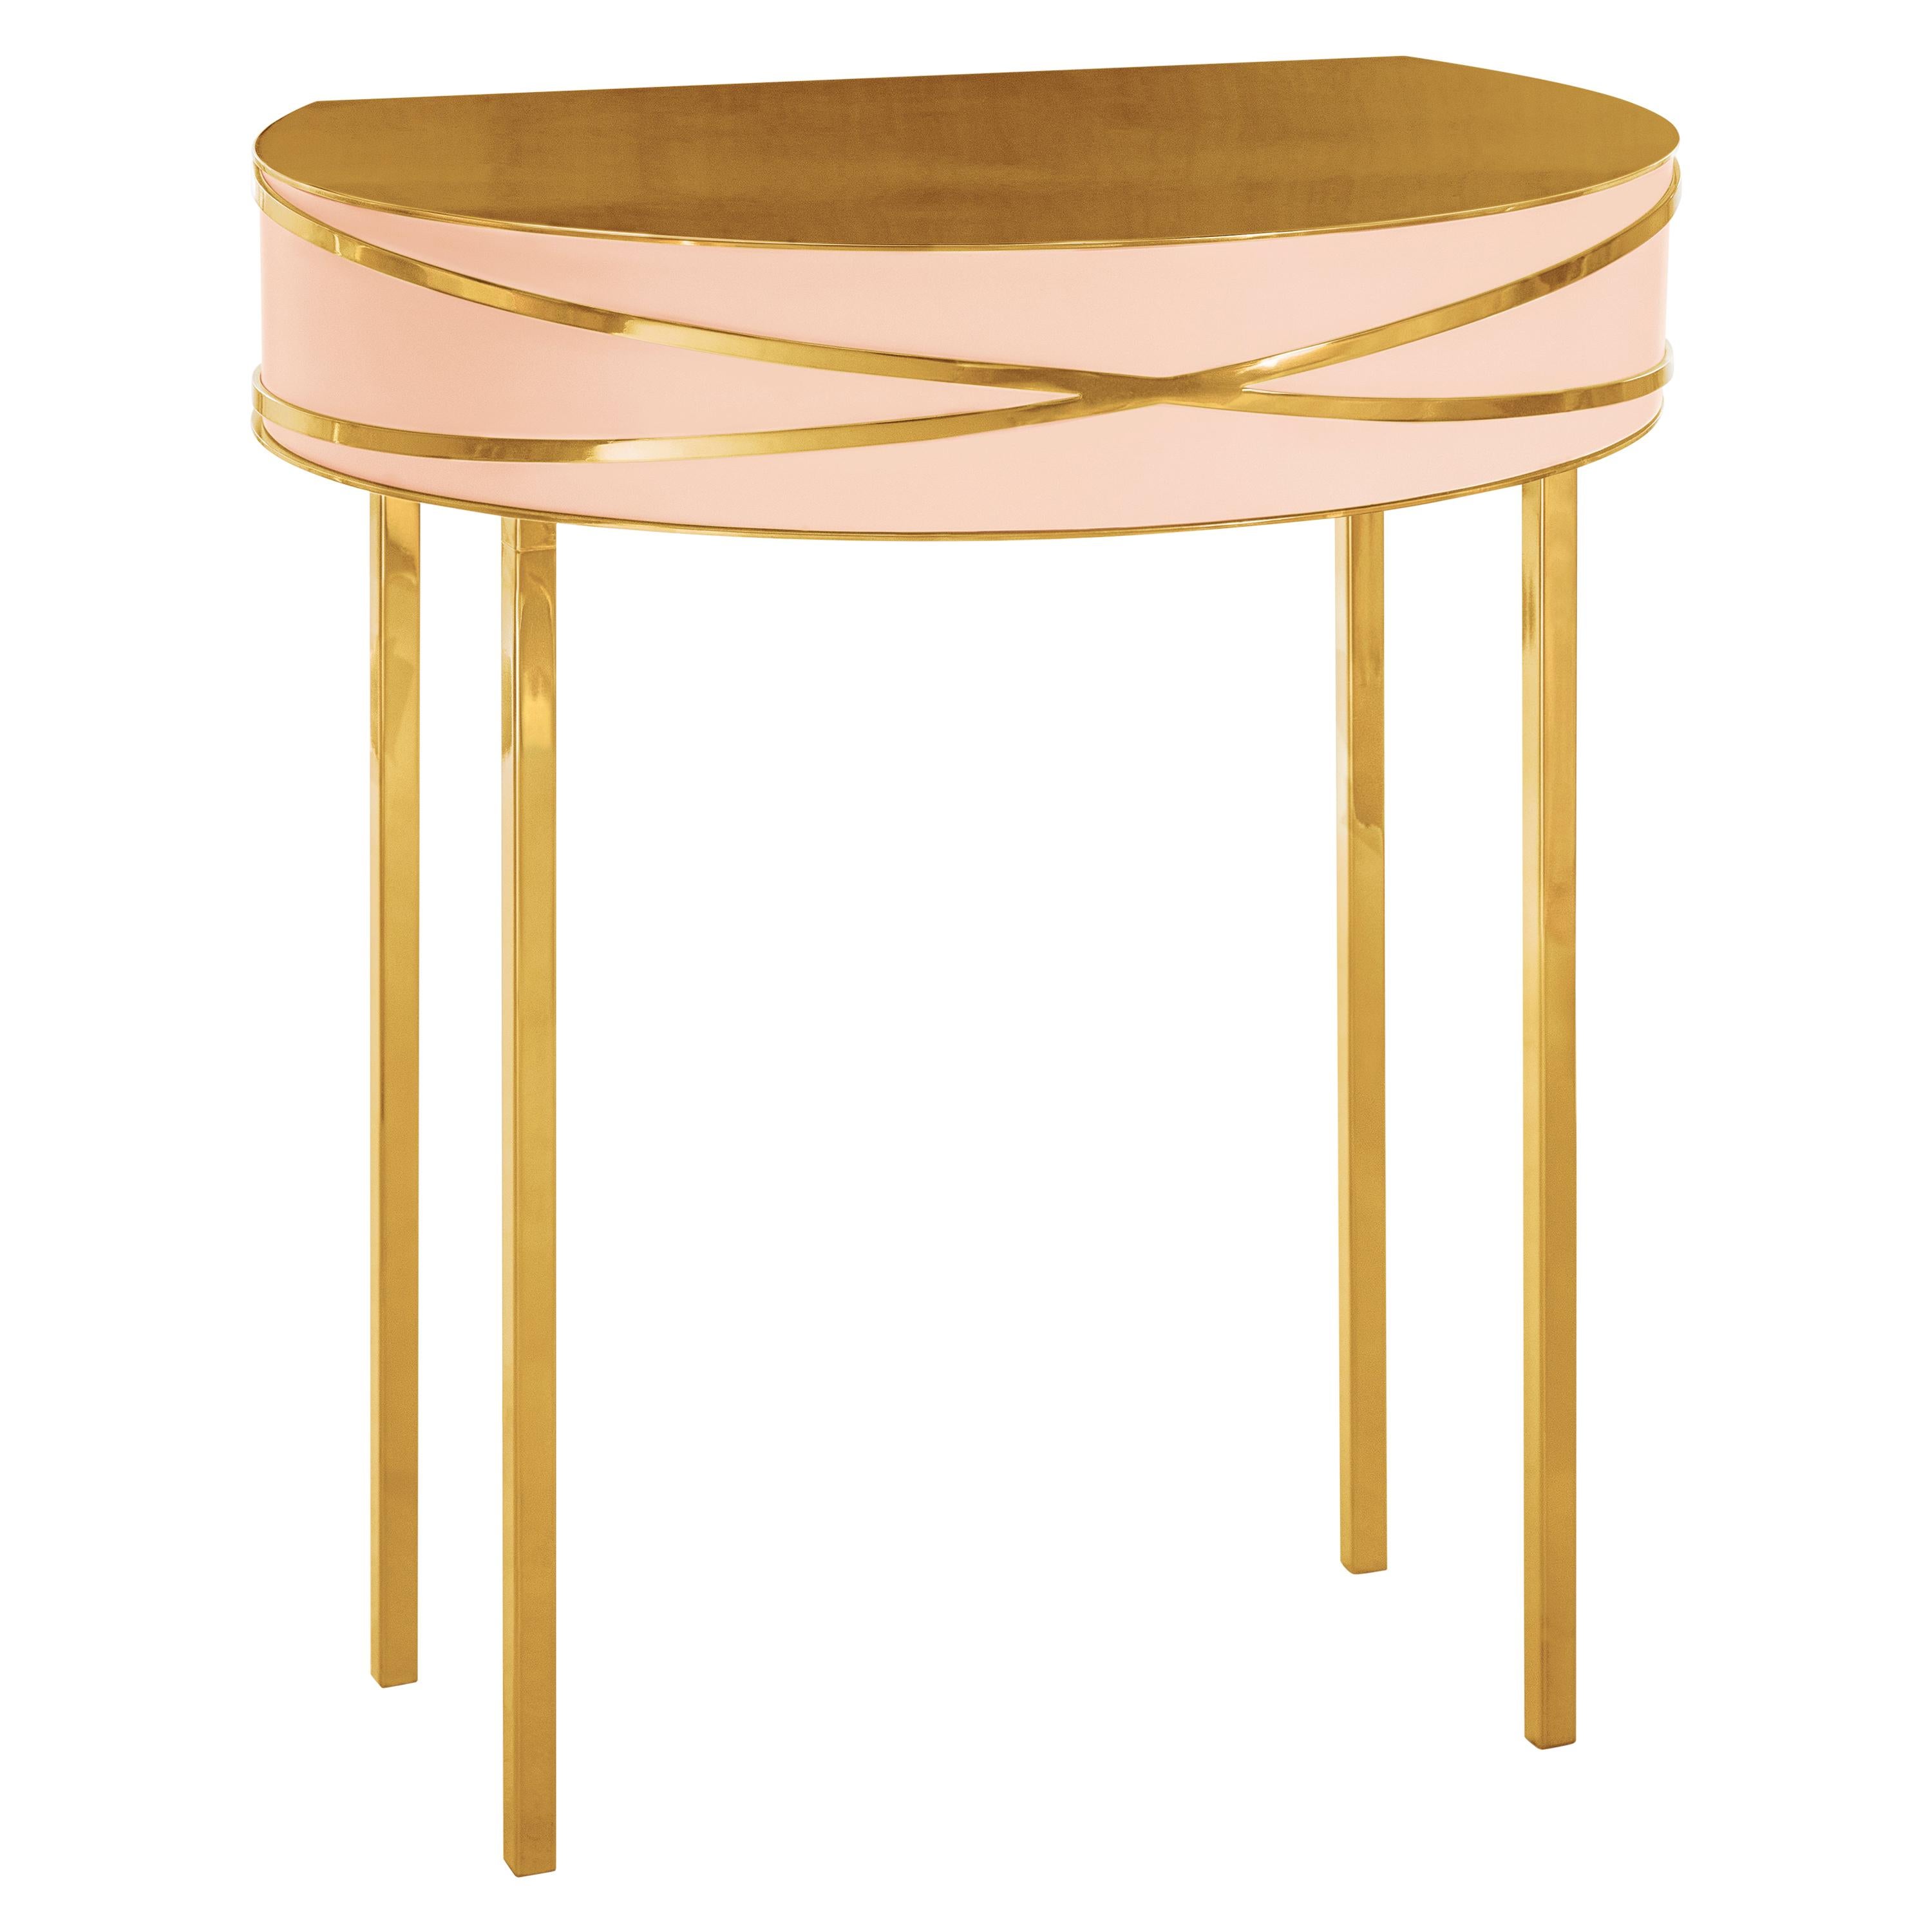 Stella Pink Console or Bedside Table with Gold Trims by Nika Zupanc For Sale